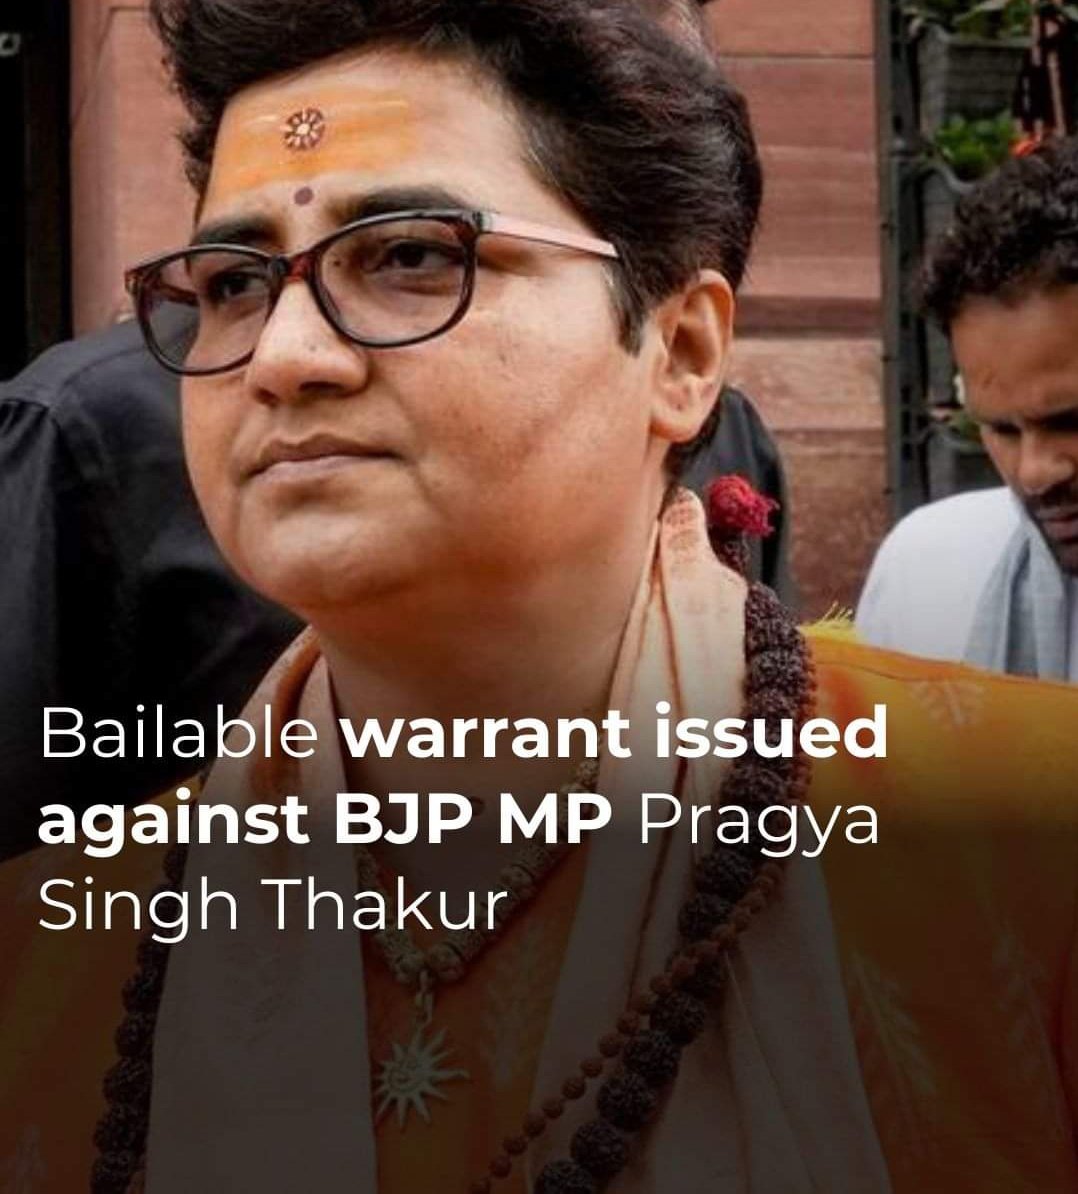 A special judge today issued a bailable warrant of Rs 10,000 against #BJP MP #PragyaSinghThakur for failing to appear before the NIA court in the 2008 #MalegaonBlastCase.